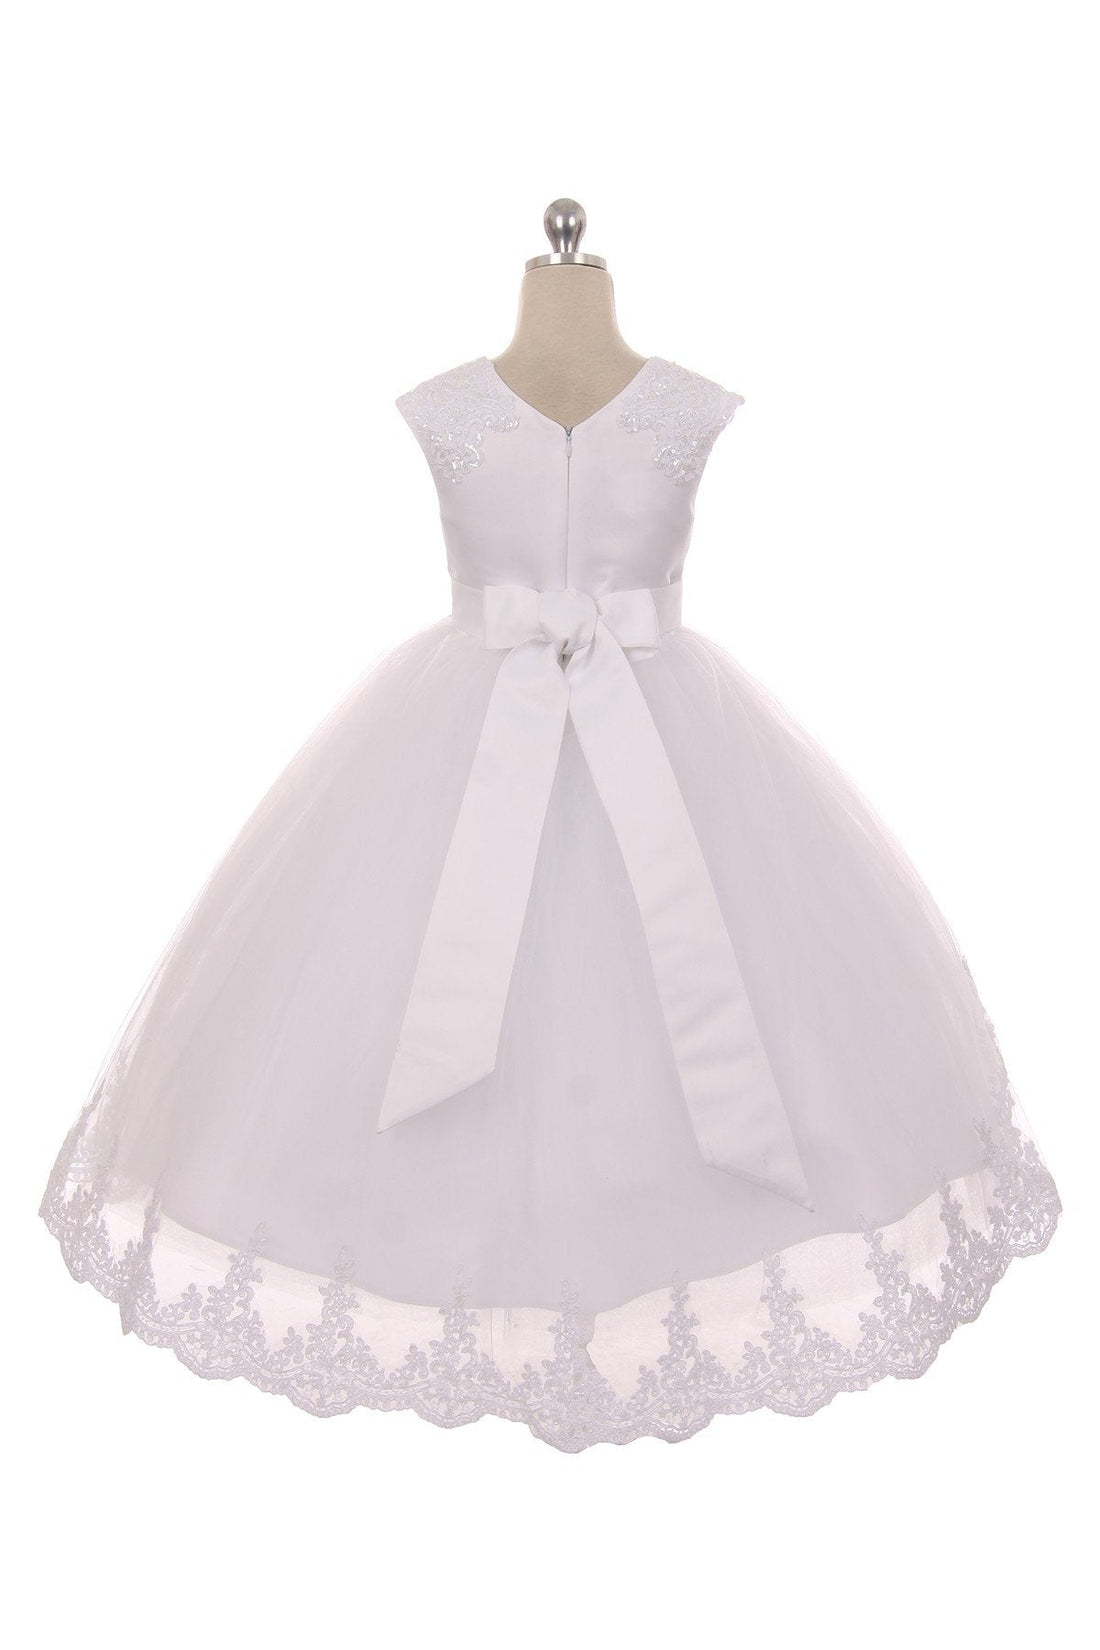 Girl Party Lace Appliqué Swoop Train Dress by AS7008 Kids Dream - Girl Formal Dresses